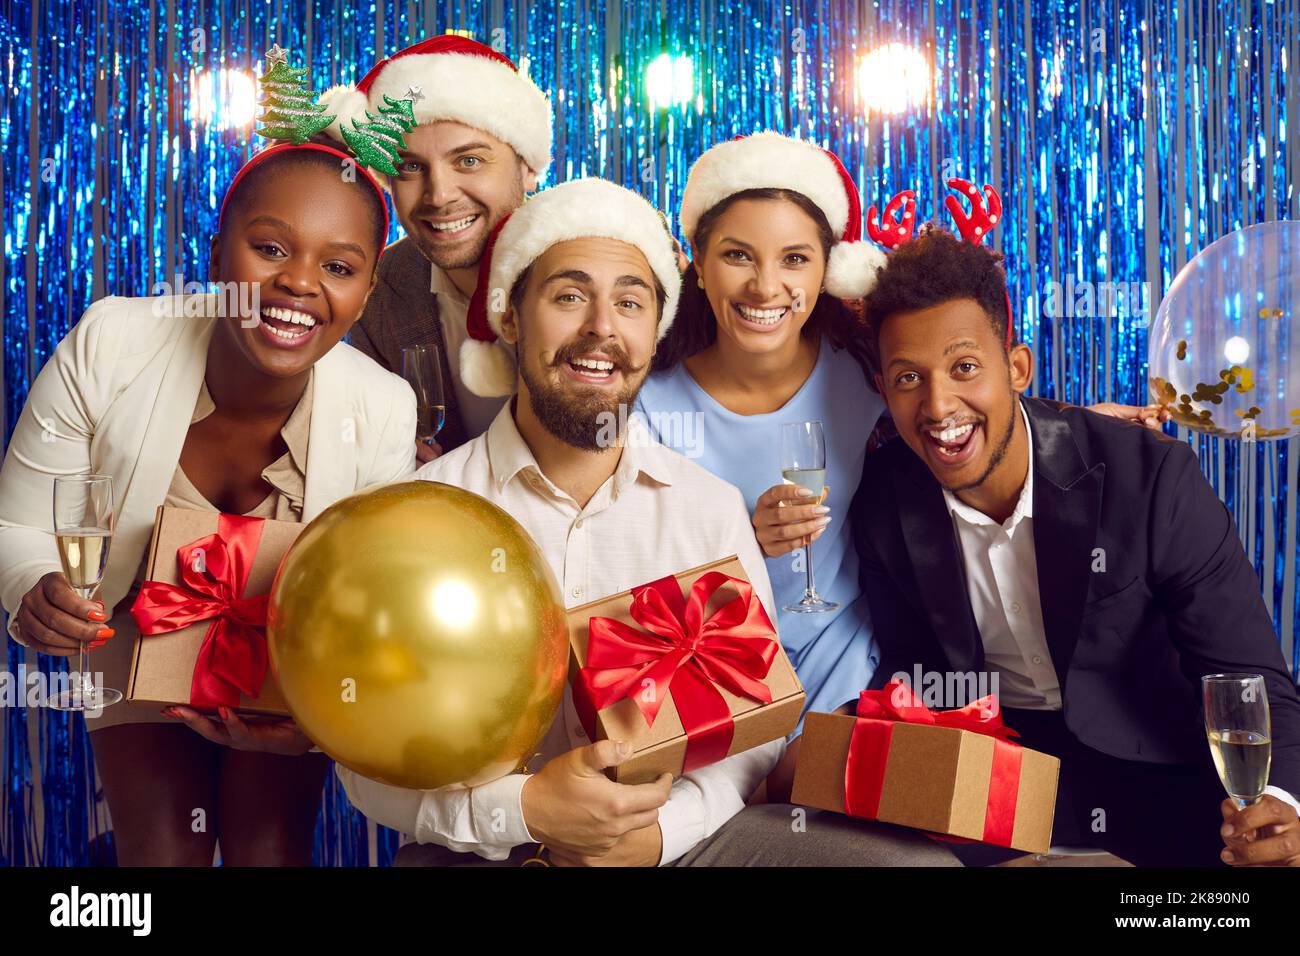 Portrait of cheerful young multiracial people having fun together at New Year's party. Stock Photo